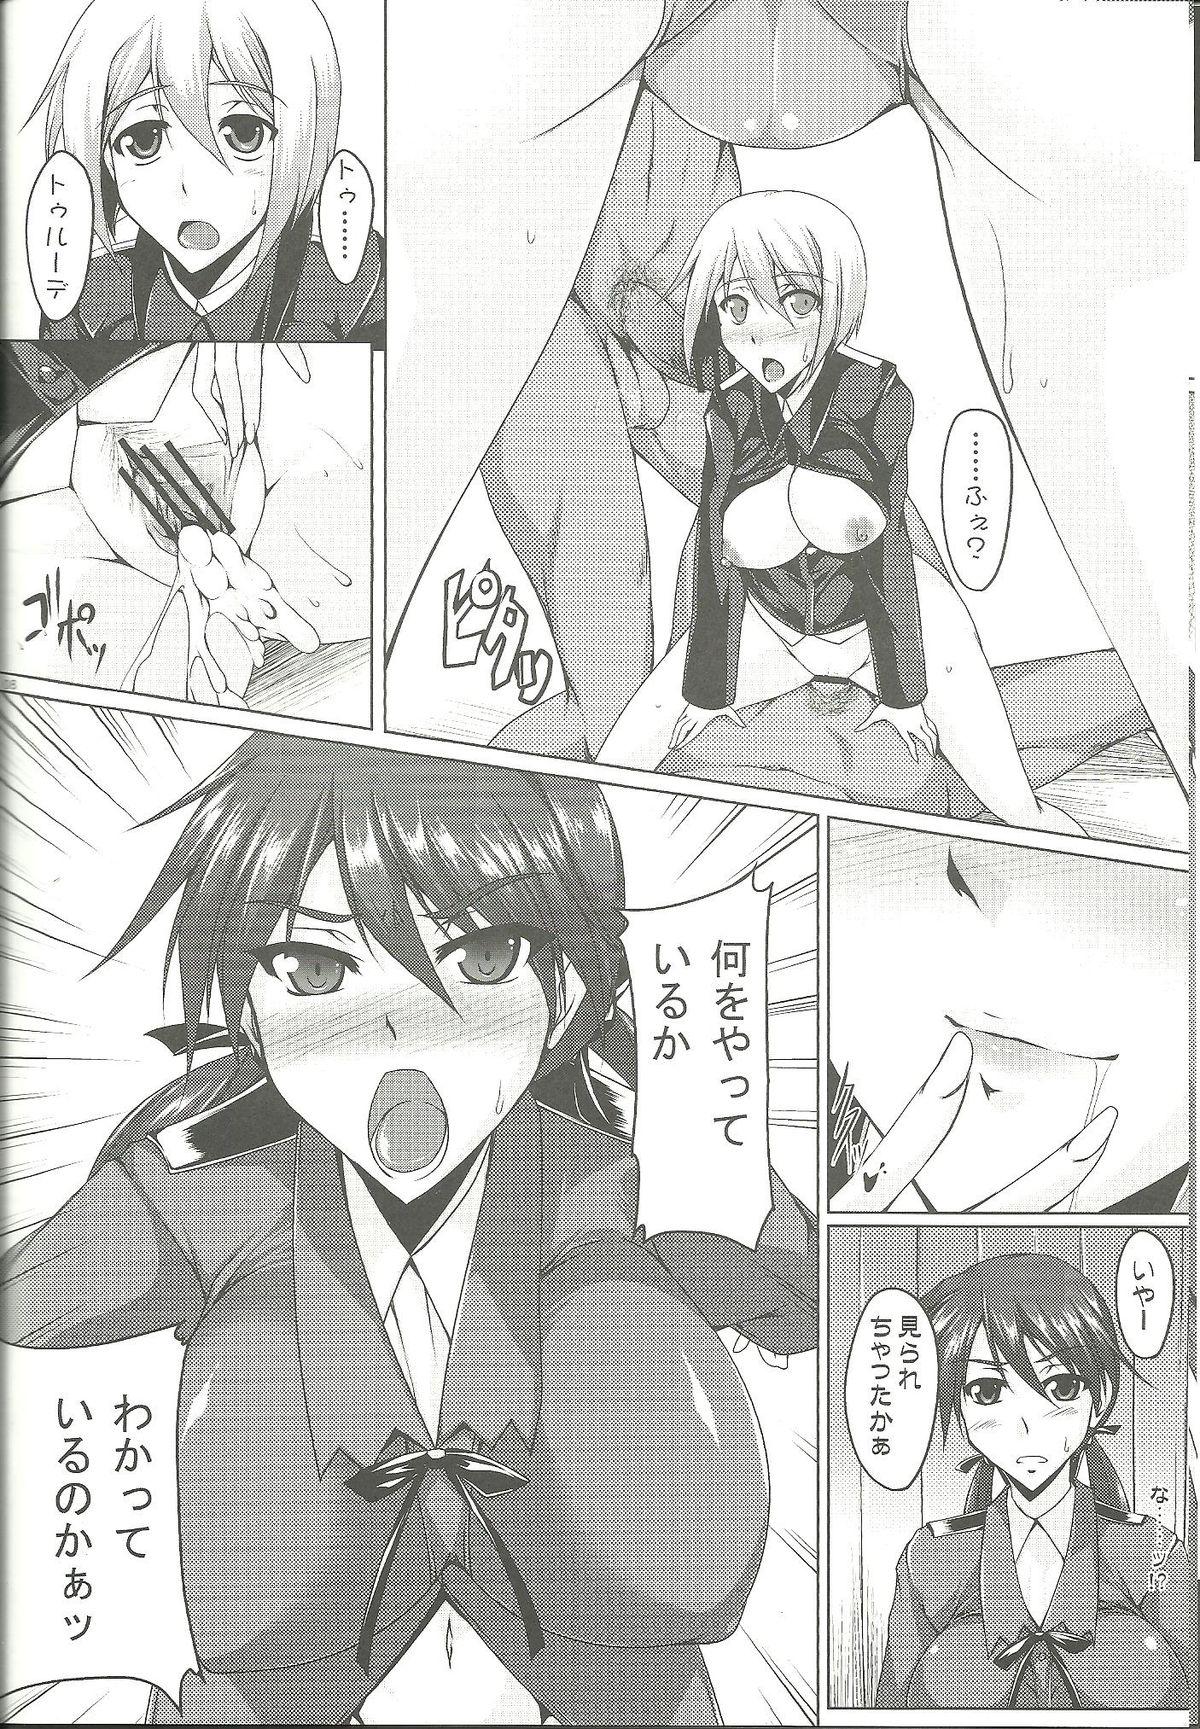 Nalgas Booby Trap - Strike witches Ex Gf - Page 7